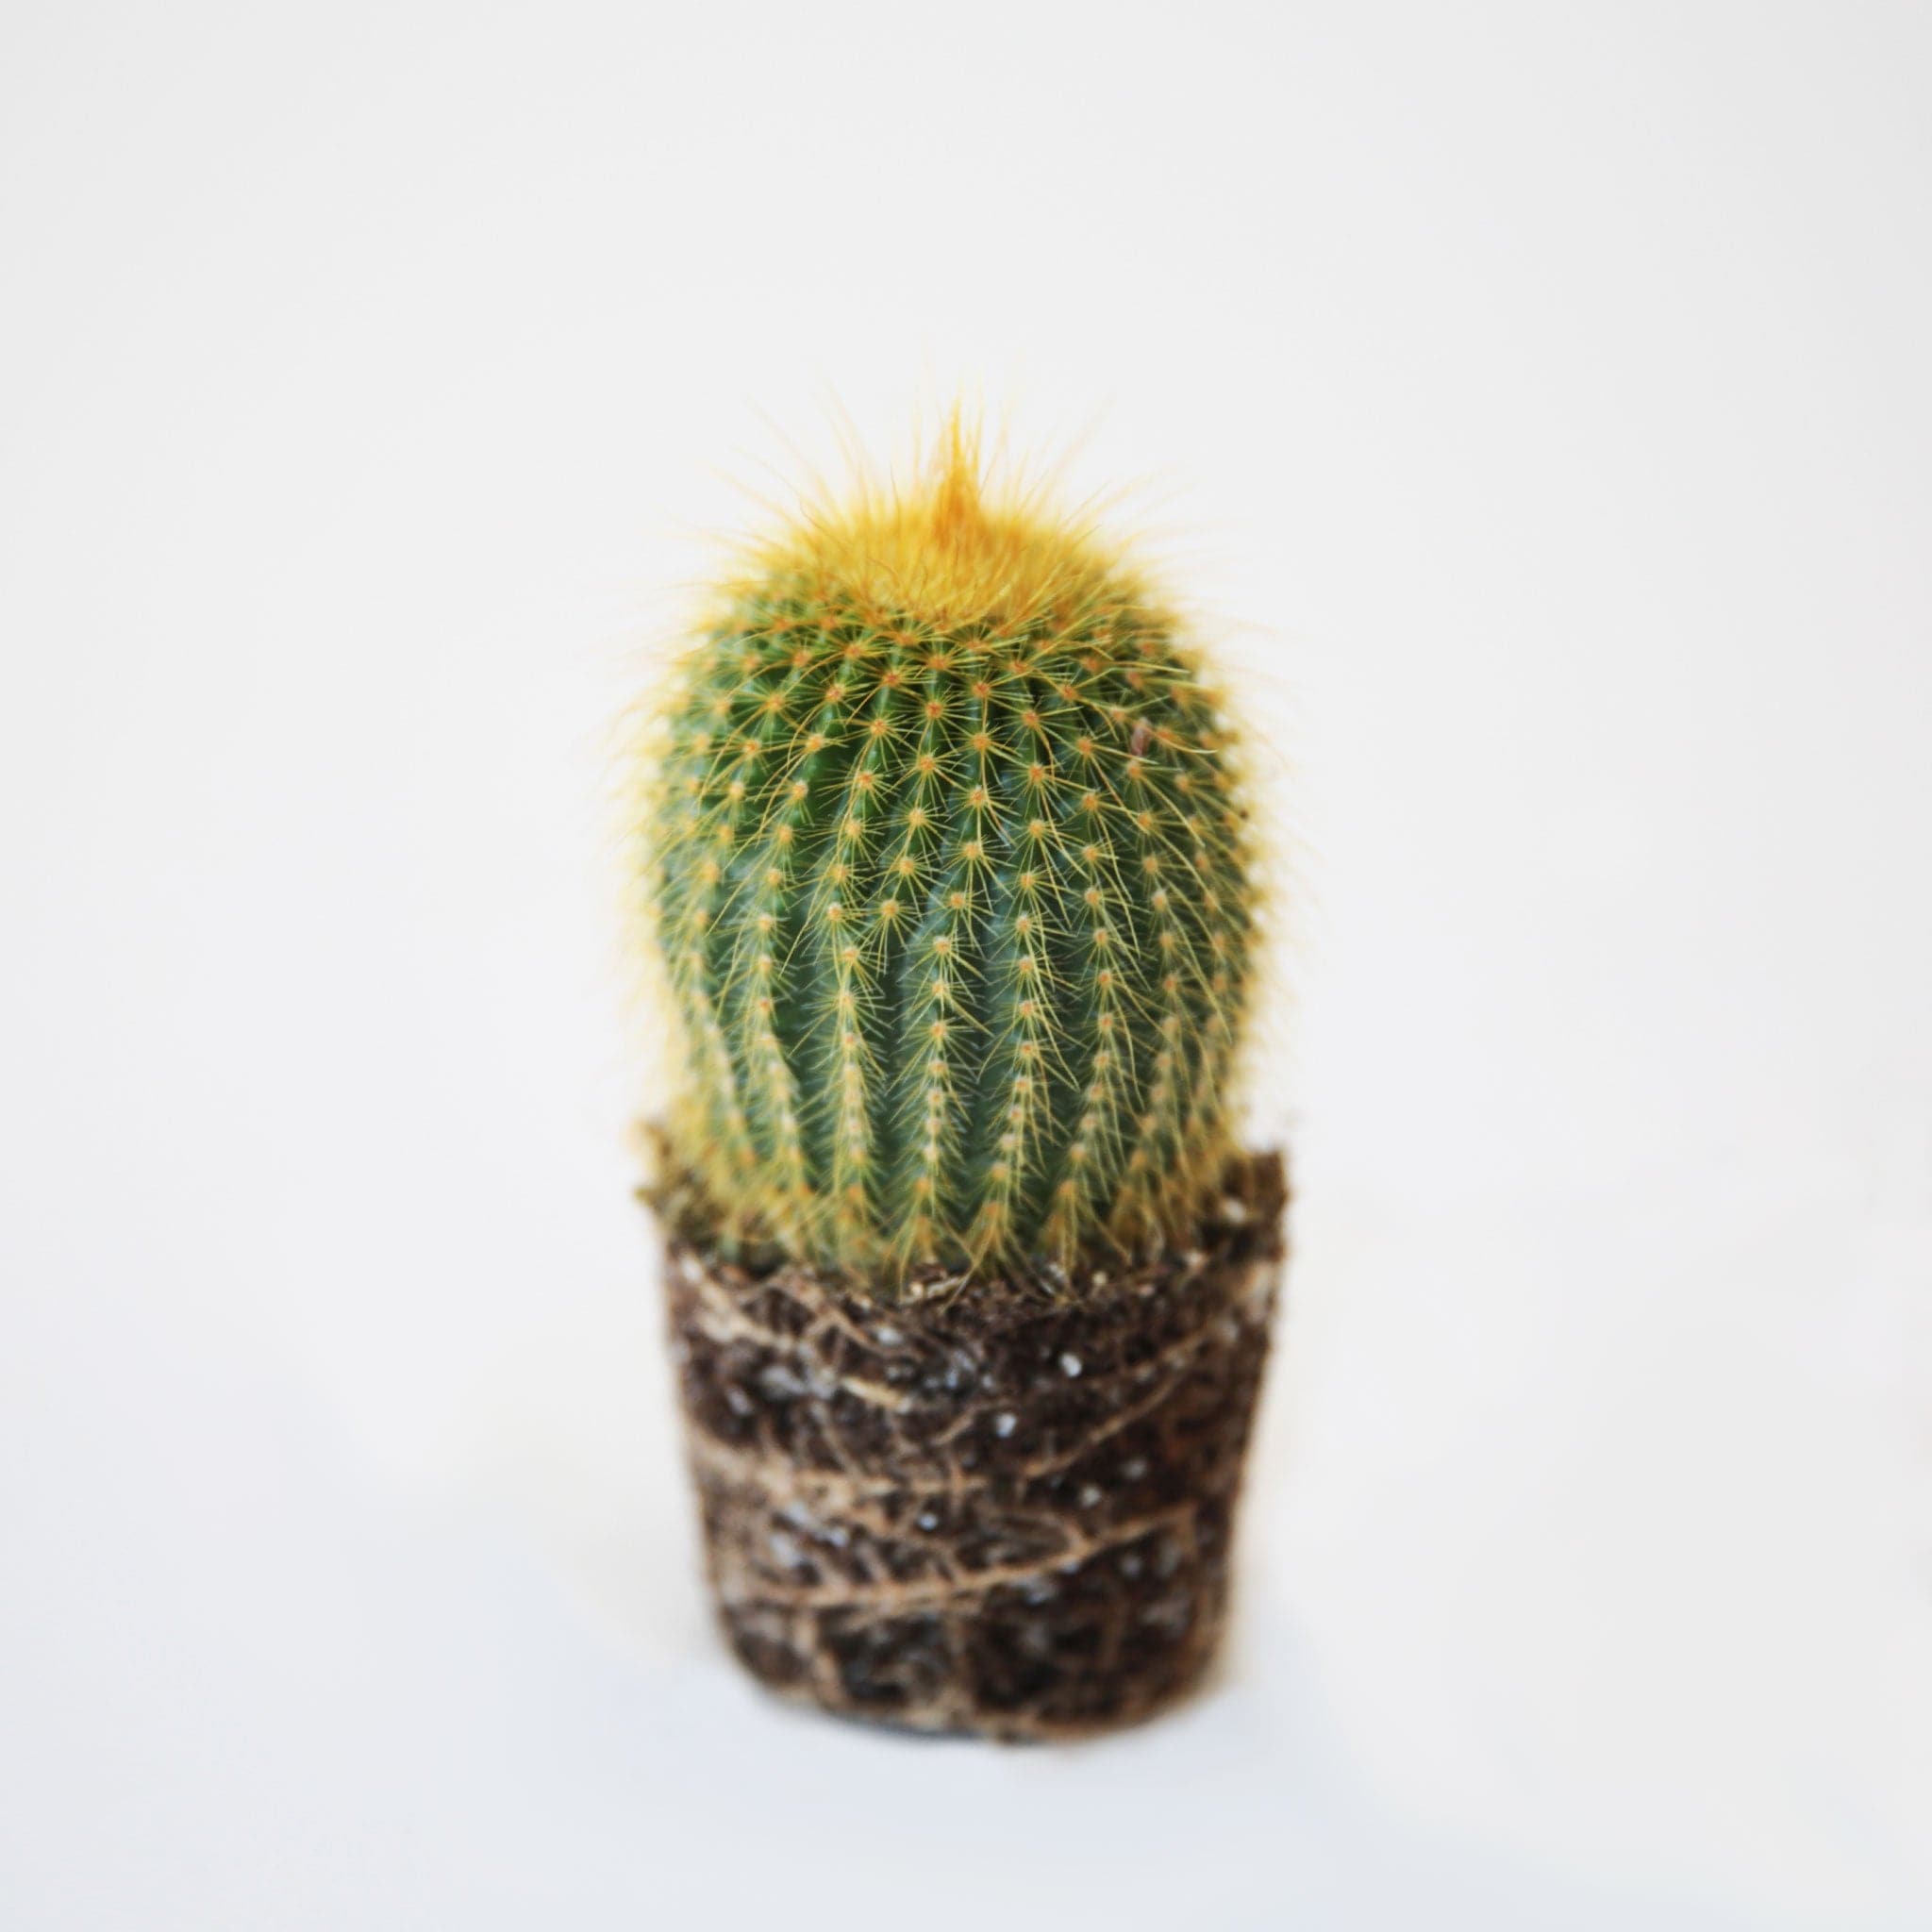 On a cream background is a yellow and green Golden Ball cactus with a rounded shape